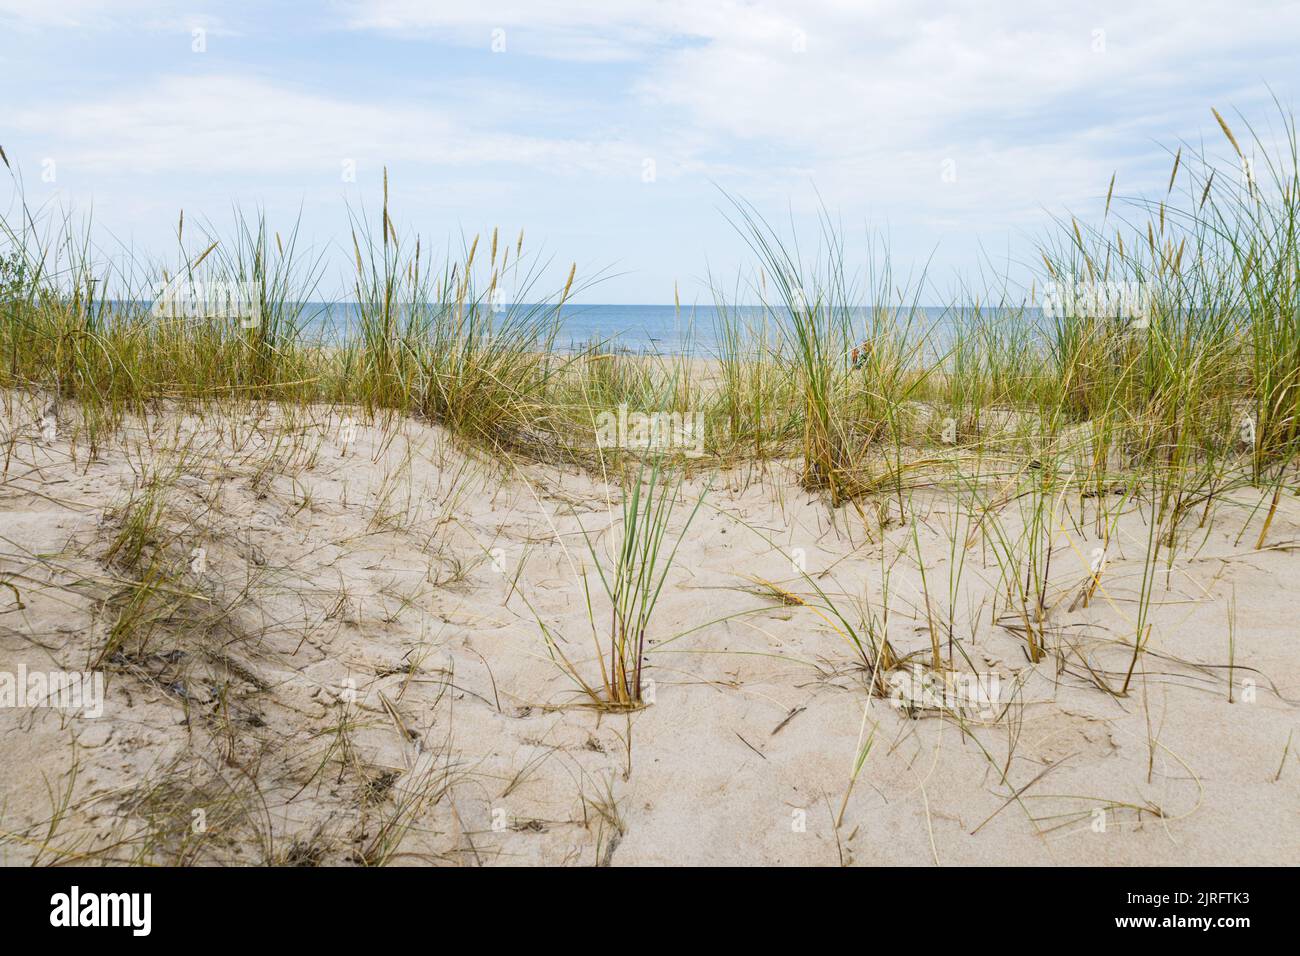 Sandy beach with dry and yellow grass, reeds, stalks, and blue Baltic sea Stock Photo